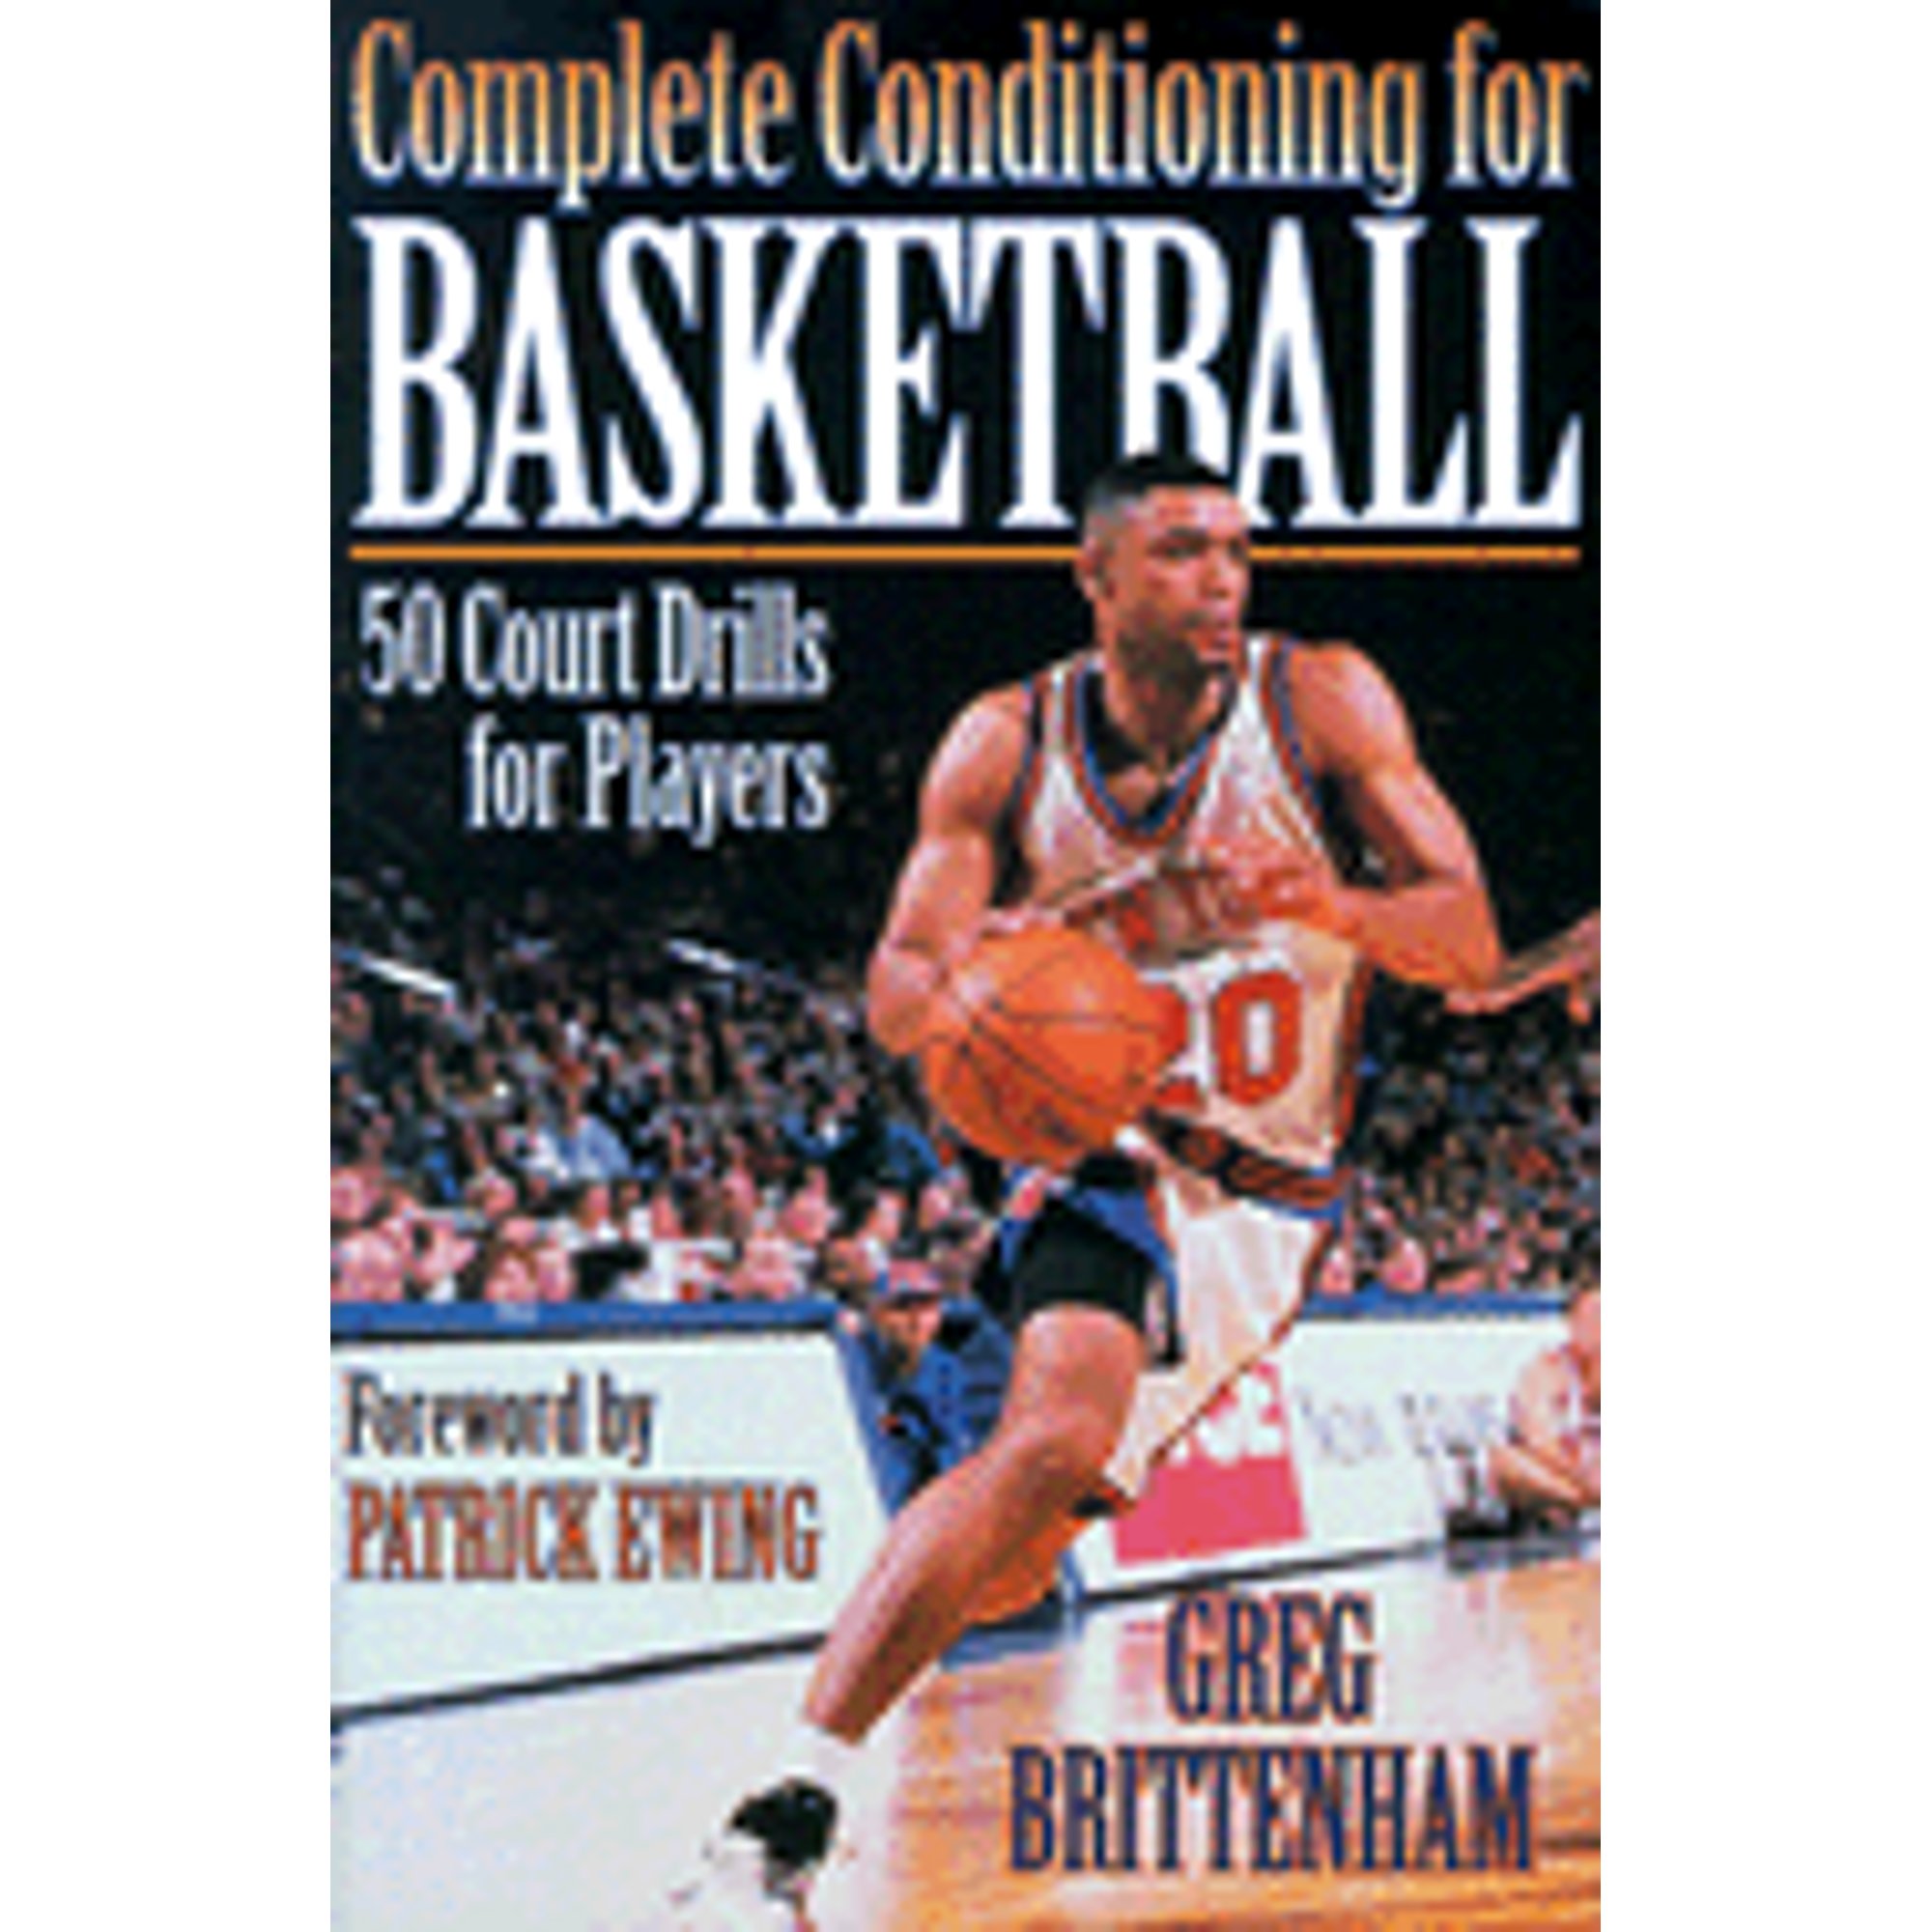 Pre-Owned Complete Conditioning for Basketball (Paperback) by Greg Brittenham, Patrick Ewing - image 1 of 1